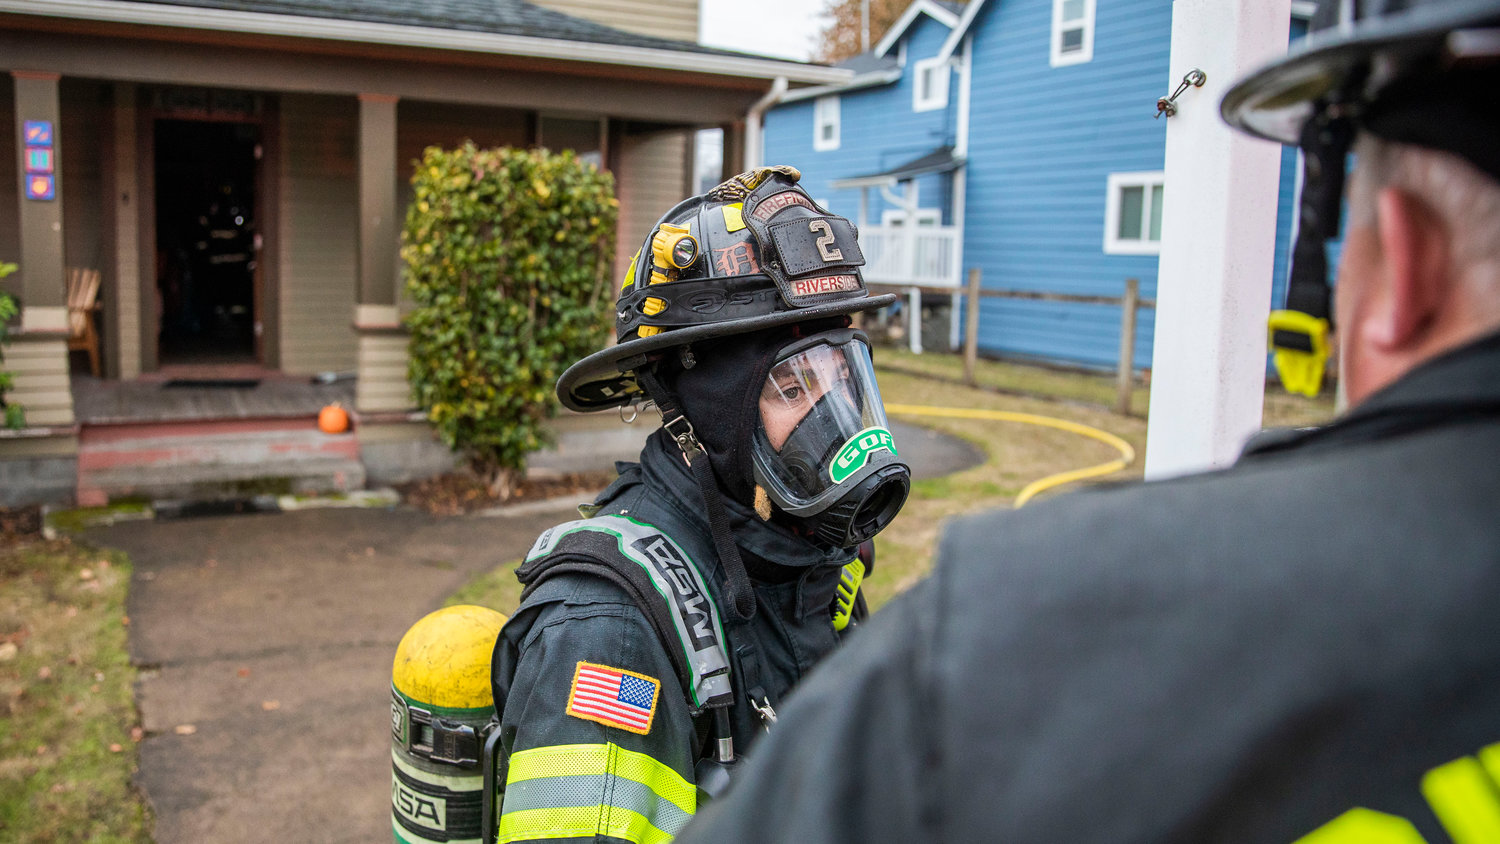 Riverside firefighters respond to a residential fire in the 200 block of North Rock Street in Centralia on Friday.